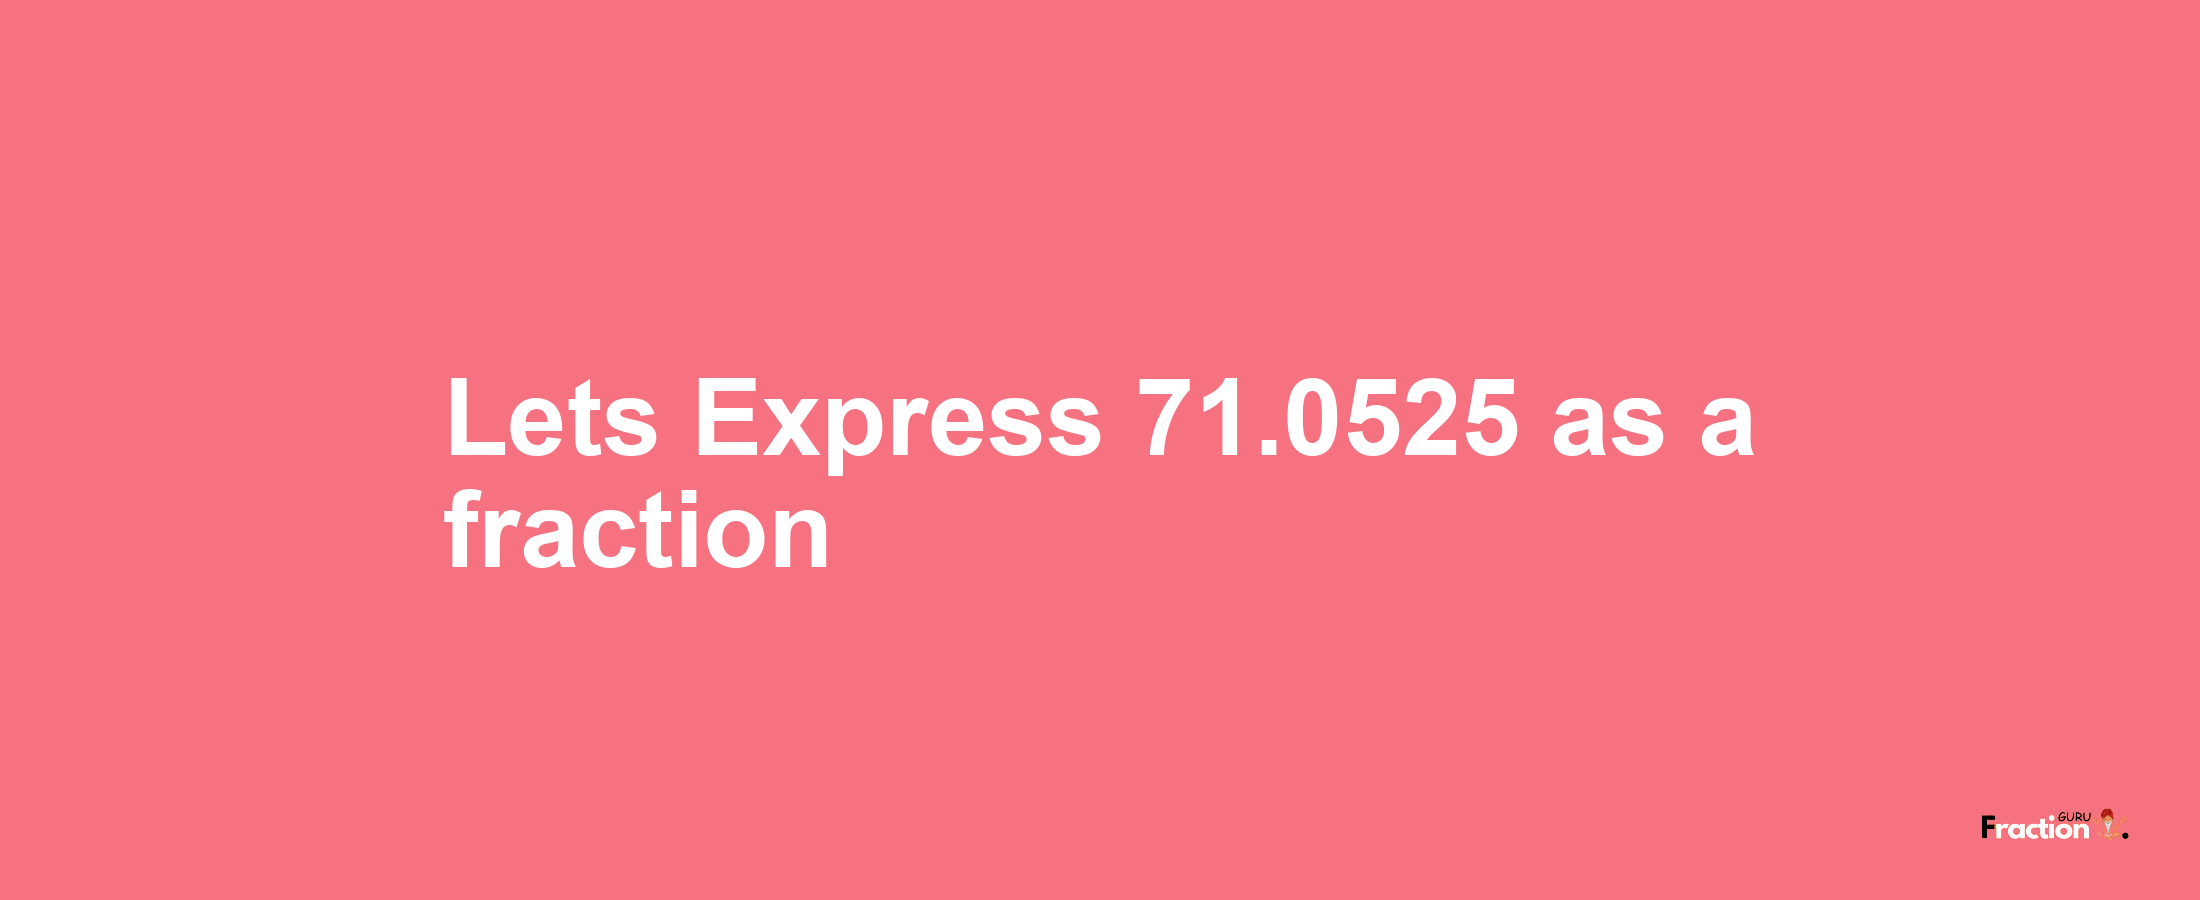 Lets Express 71.0525 as afraction